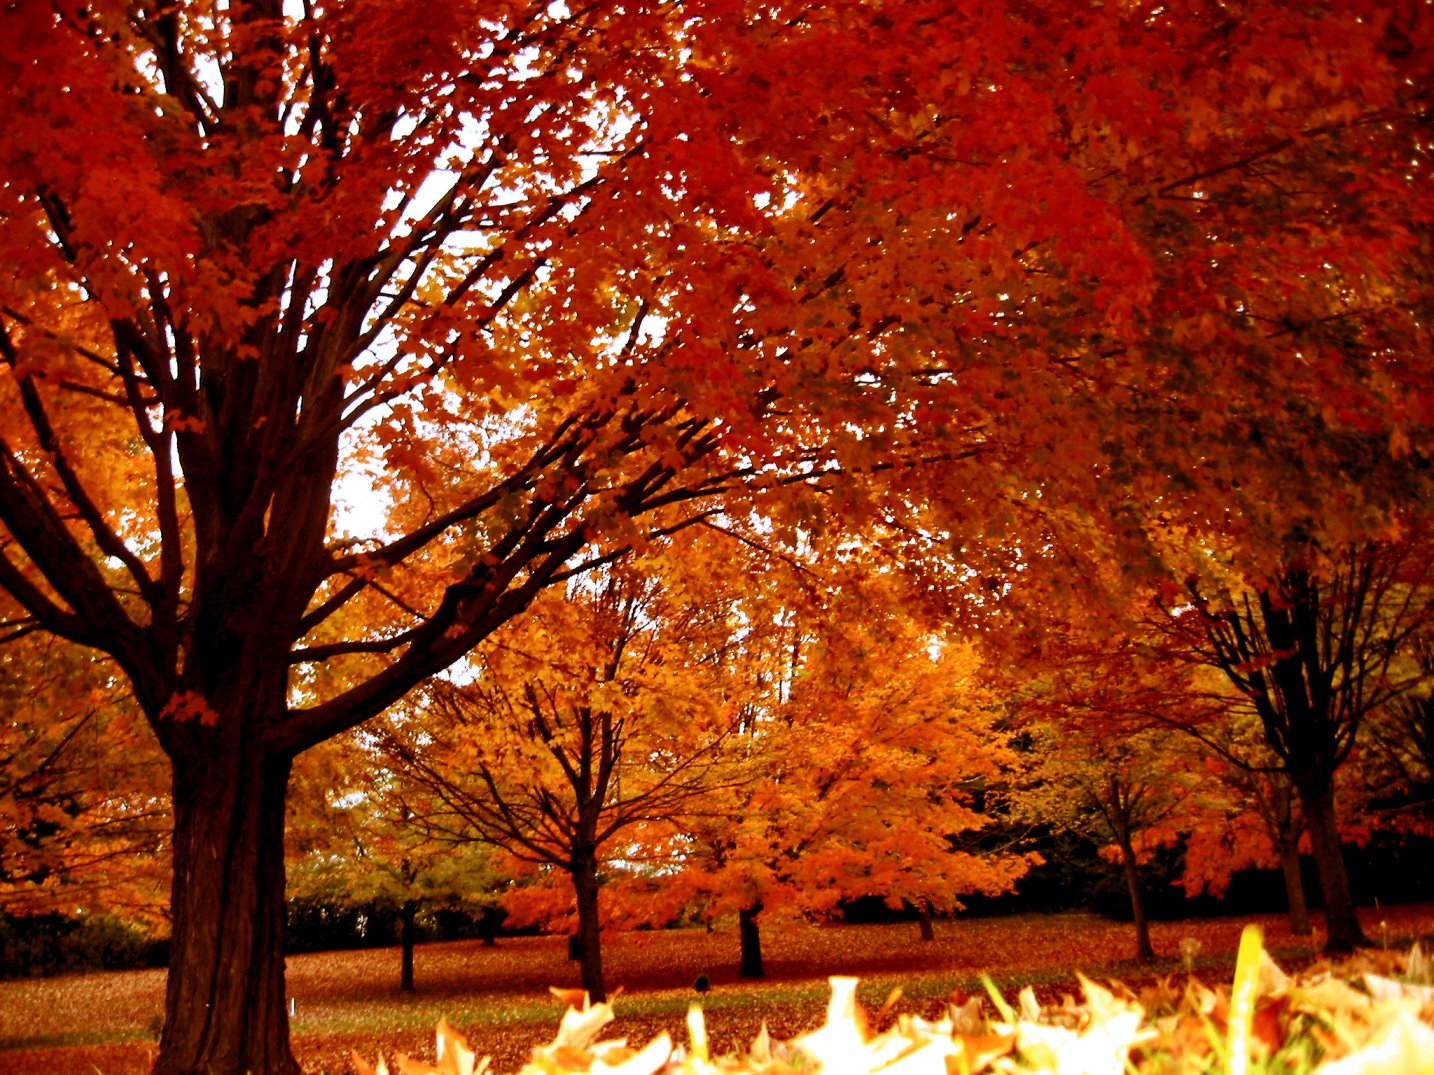 Amp Autumn Tree Photos In A Drizzling Rain Wisconsin And An